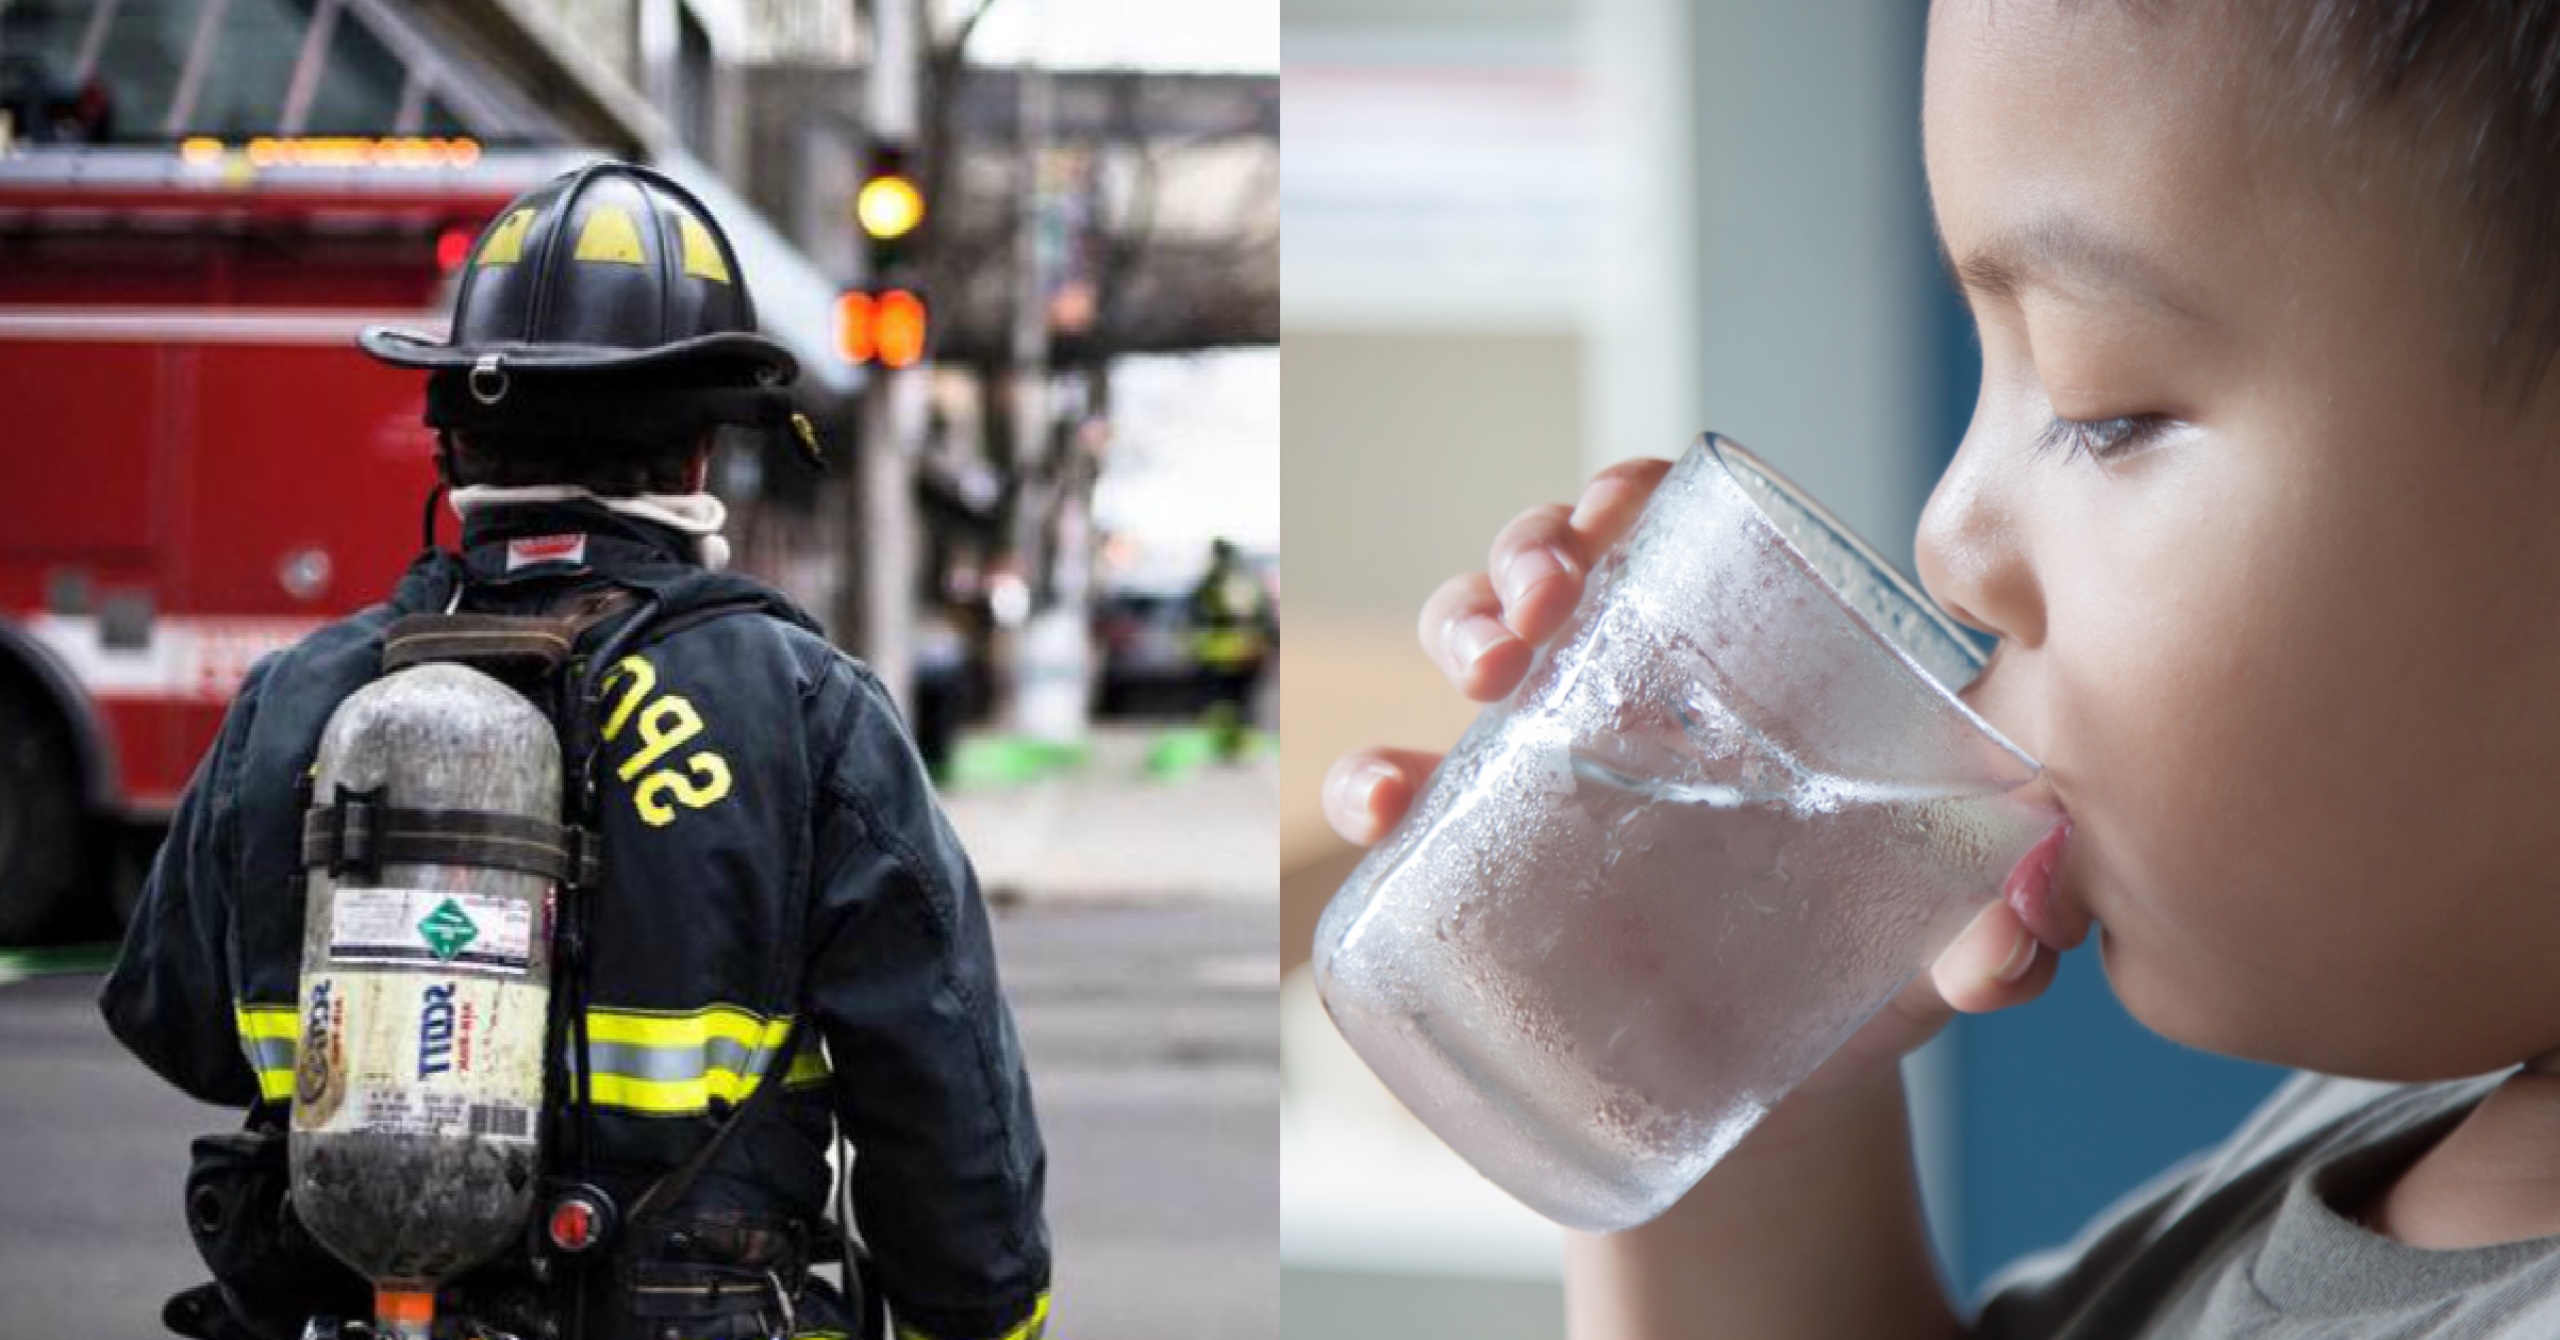 firefighter and child drinking water